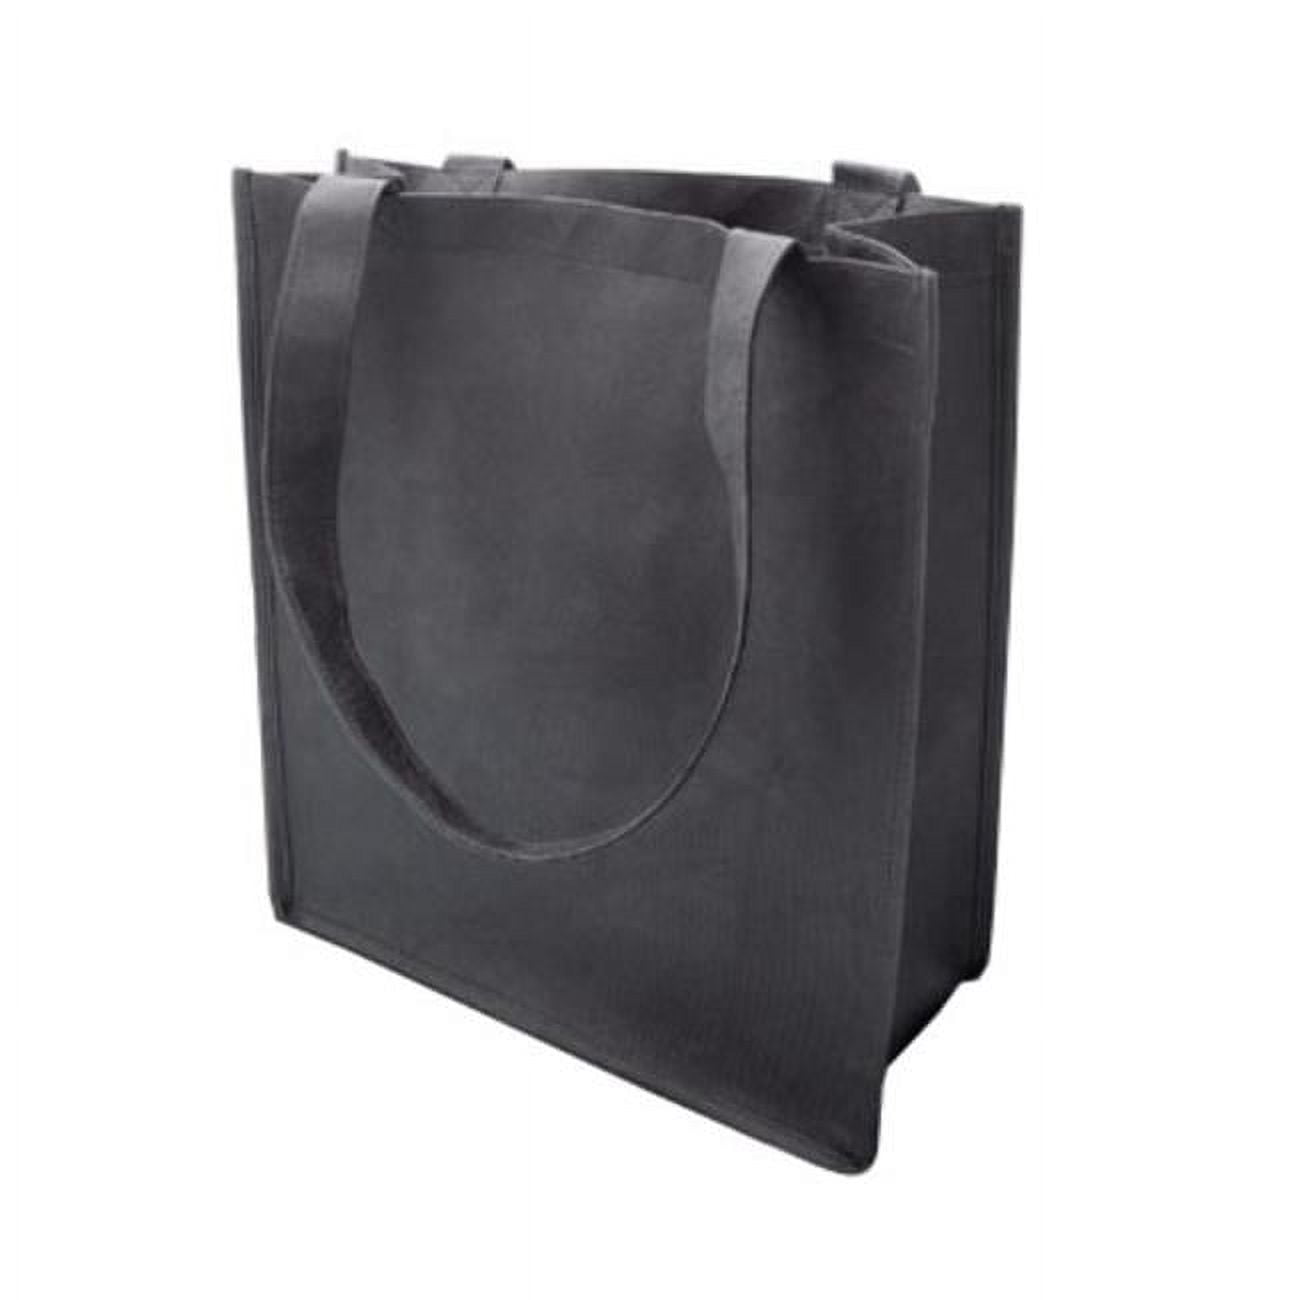 2333784 100 G Non-woven Recycled Shopping Tote - Black, Case Of 120